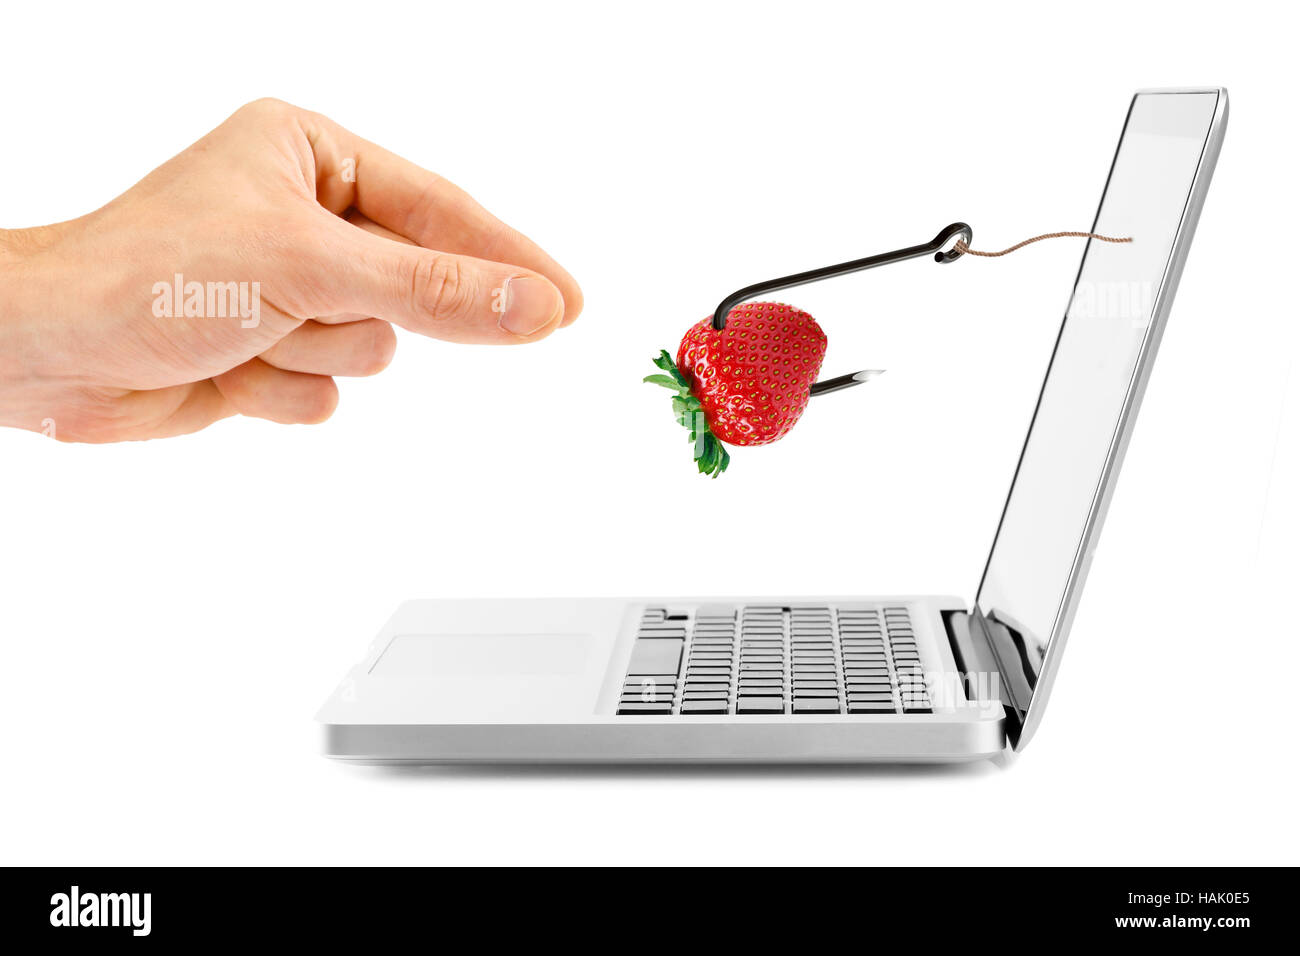 internet fraud concept. hook with bait through laptop screen Stock Photo